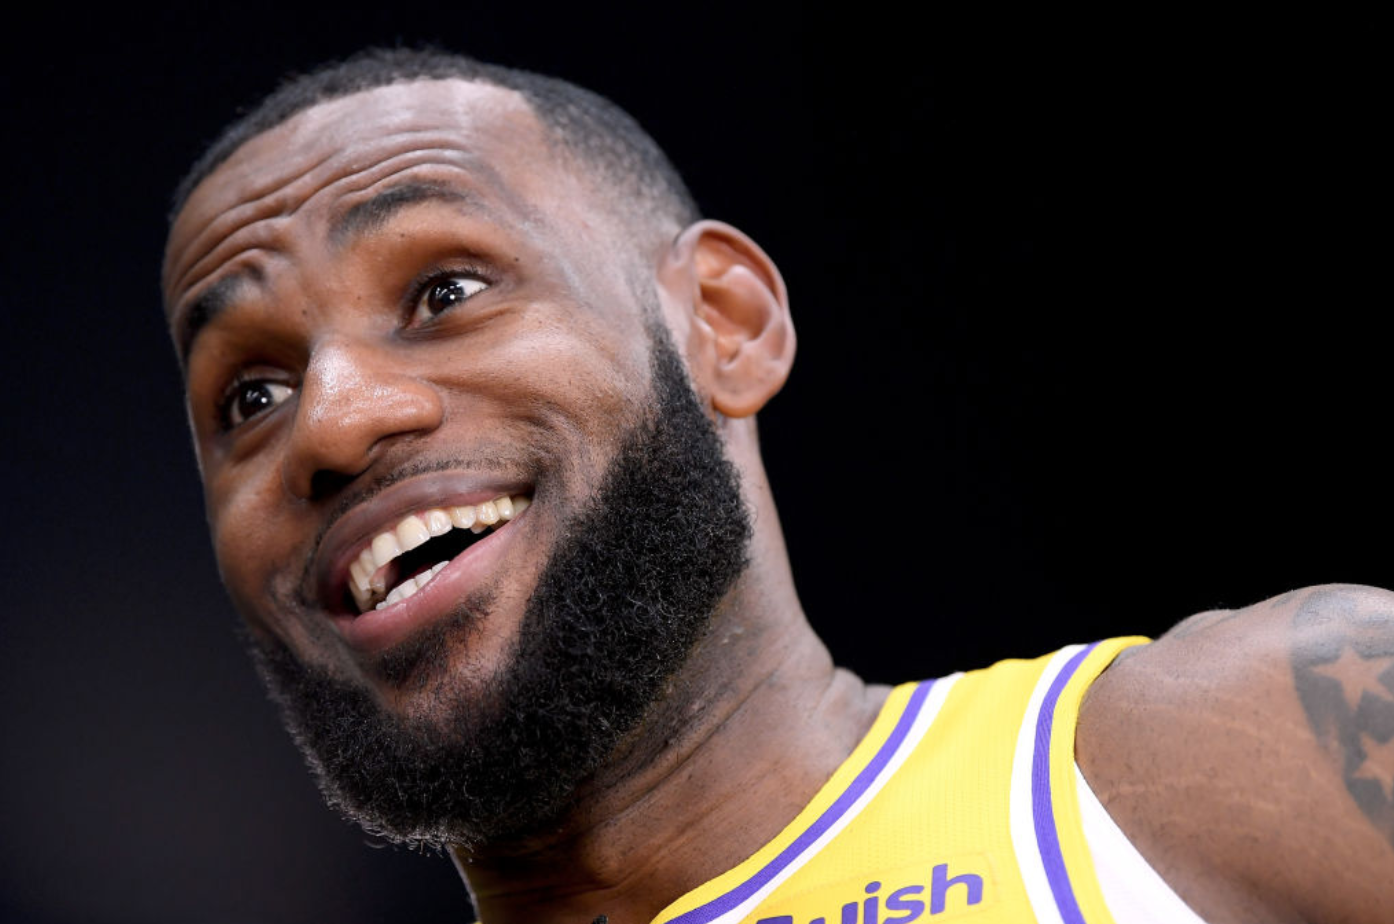 Stephen A. Smith And Skip Bayless Are Right, LeBron James' Game-Winner Against Warriors Was Lucky